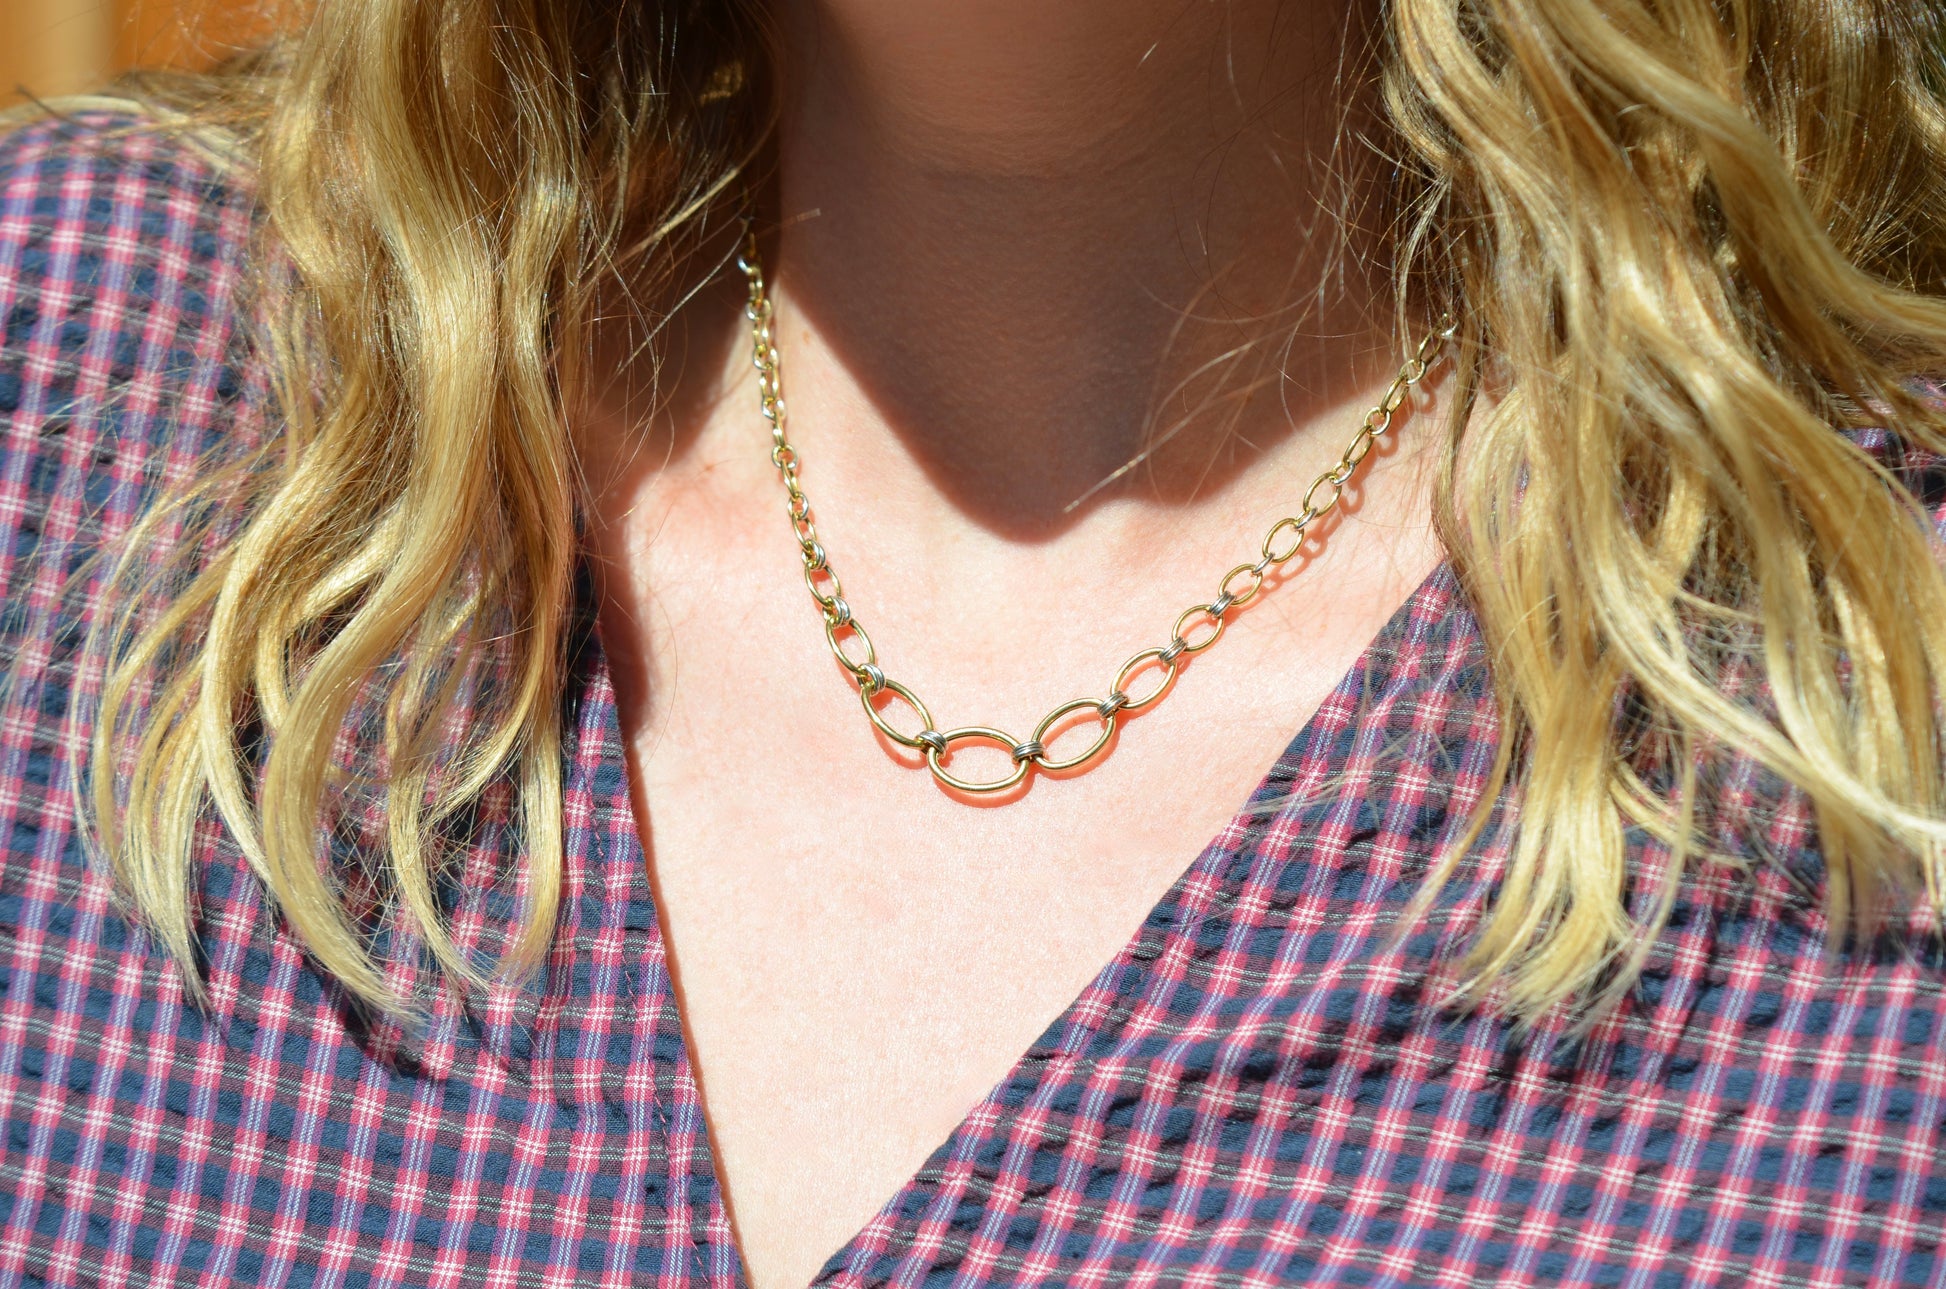 A Caucasian model is wearing the necklace, and the centre hangs slightly below her clavicle. She's wearing a v-neck red and blue gingham blouse.